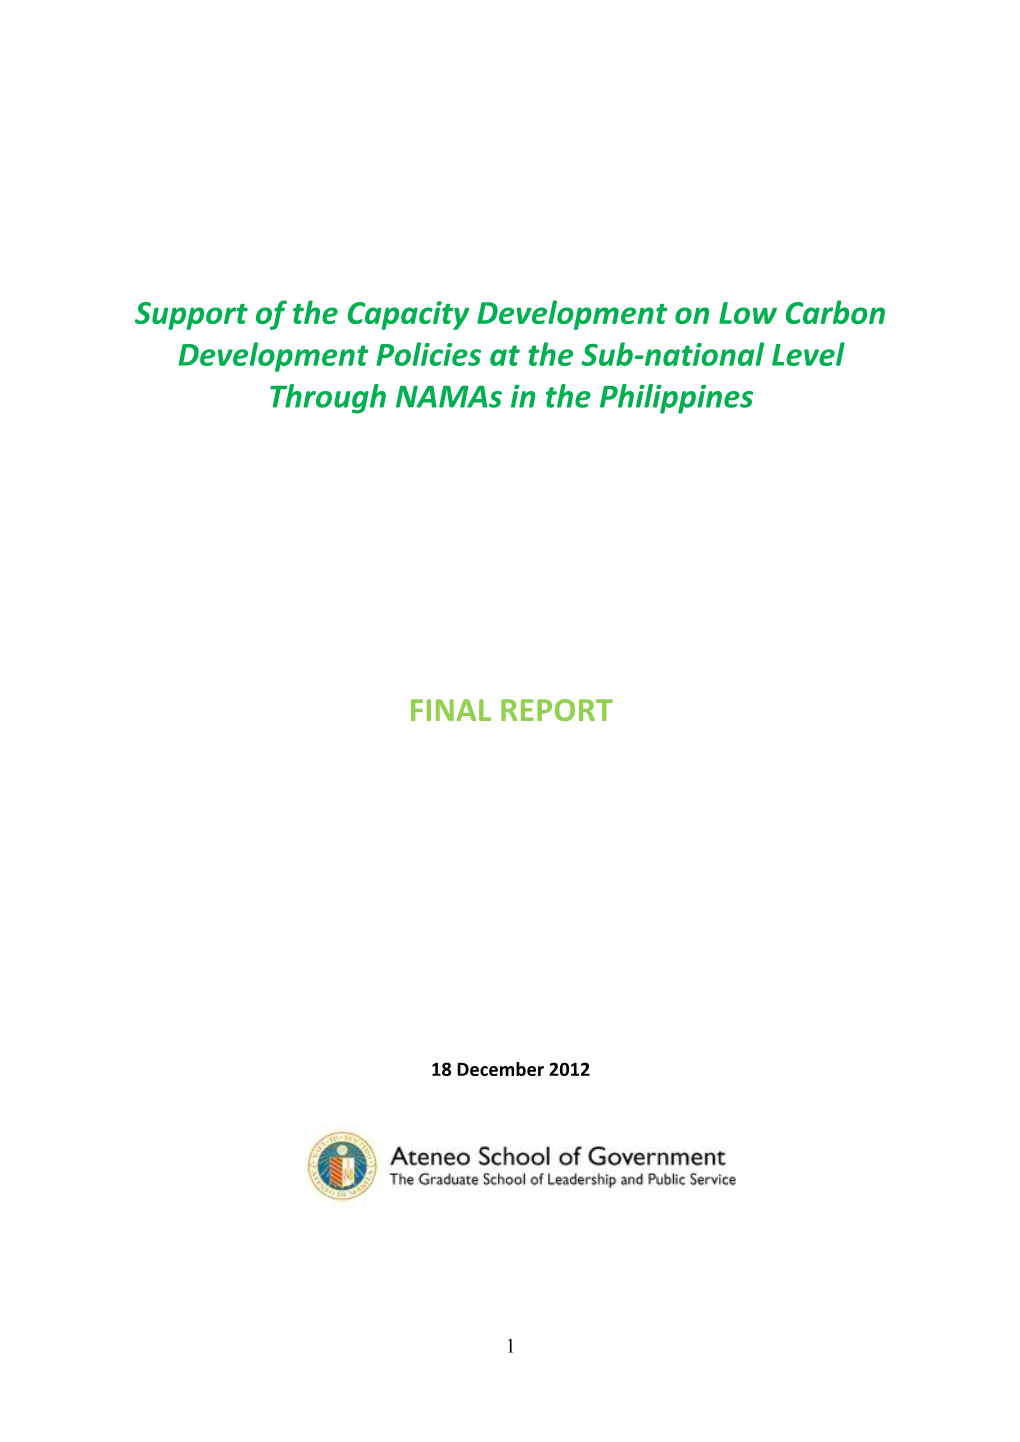 Support of the Capacity Development on Low Carbon Development Policies at the Sub‐National Level Through Namas in the Philippines